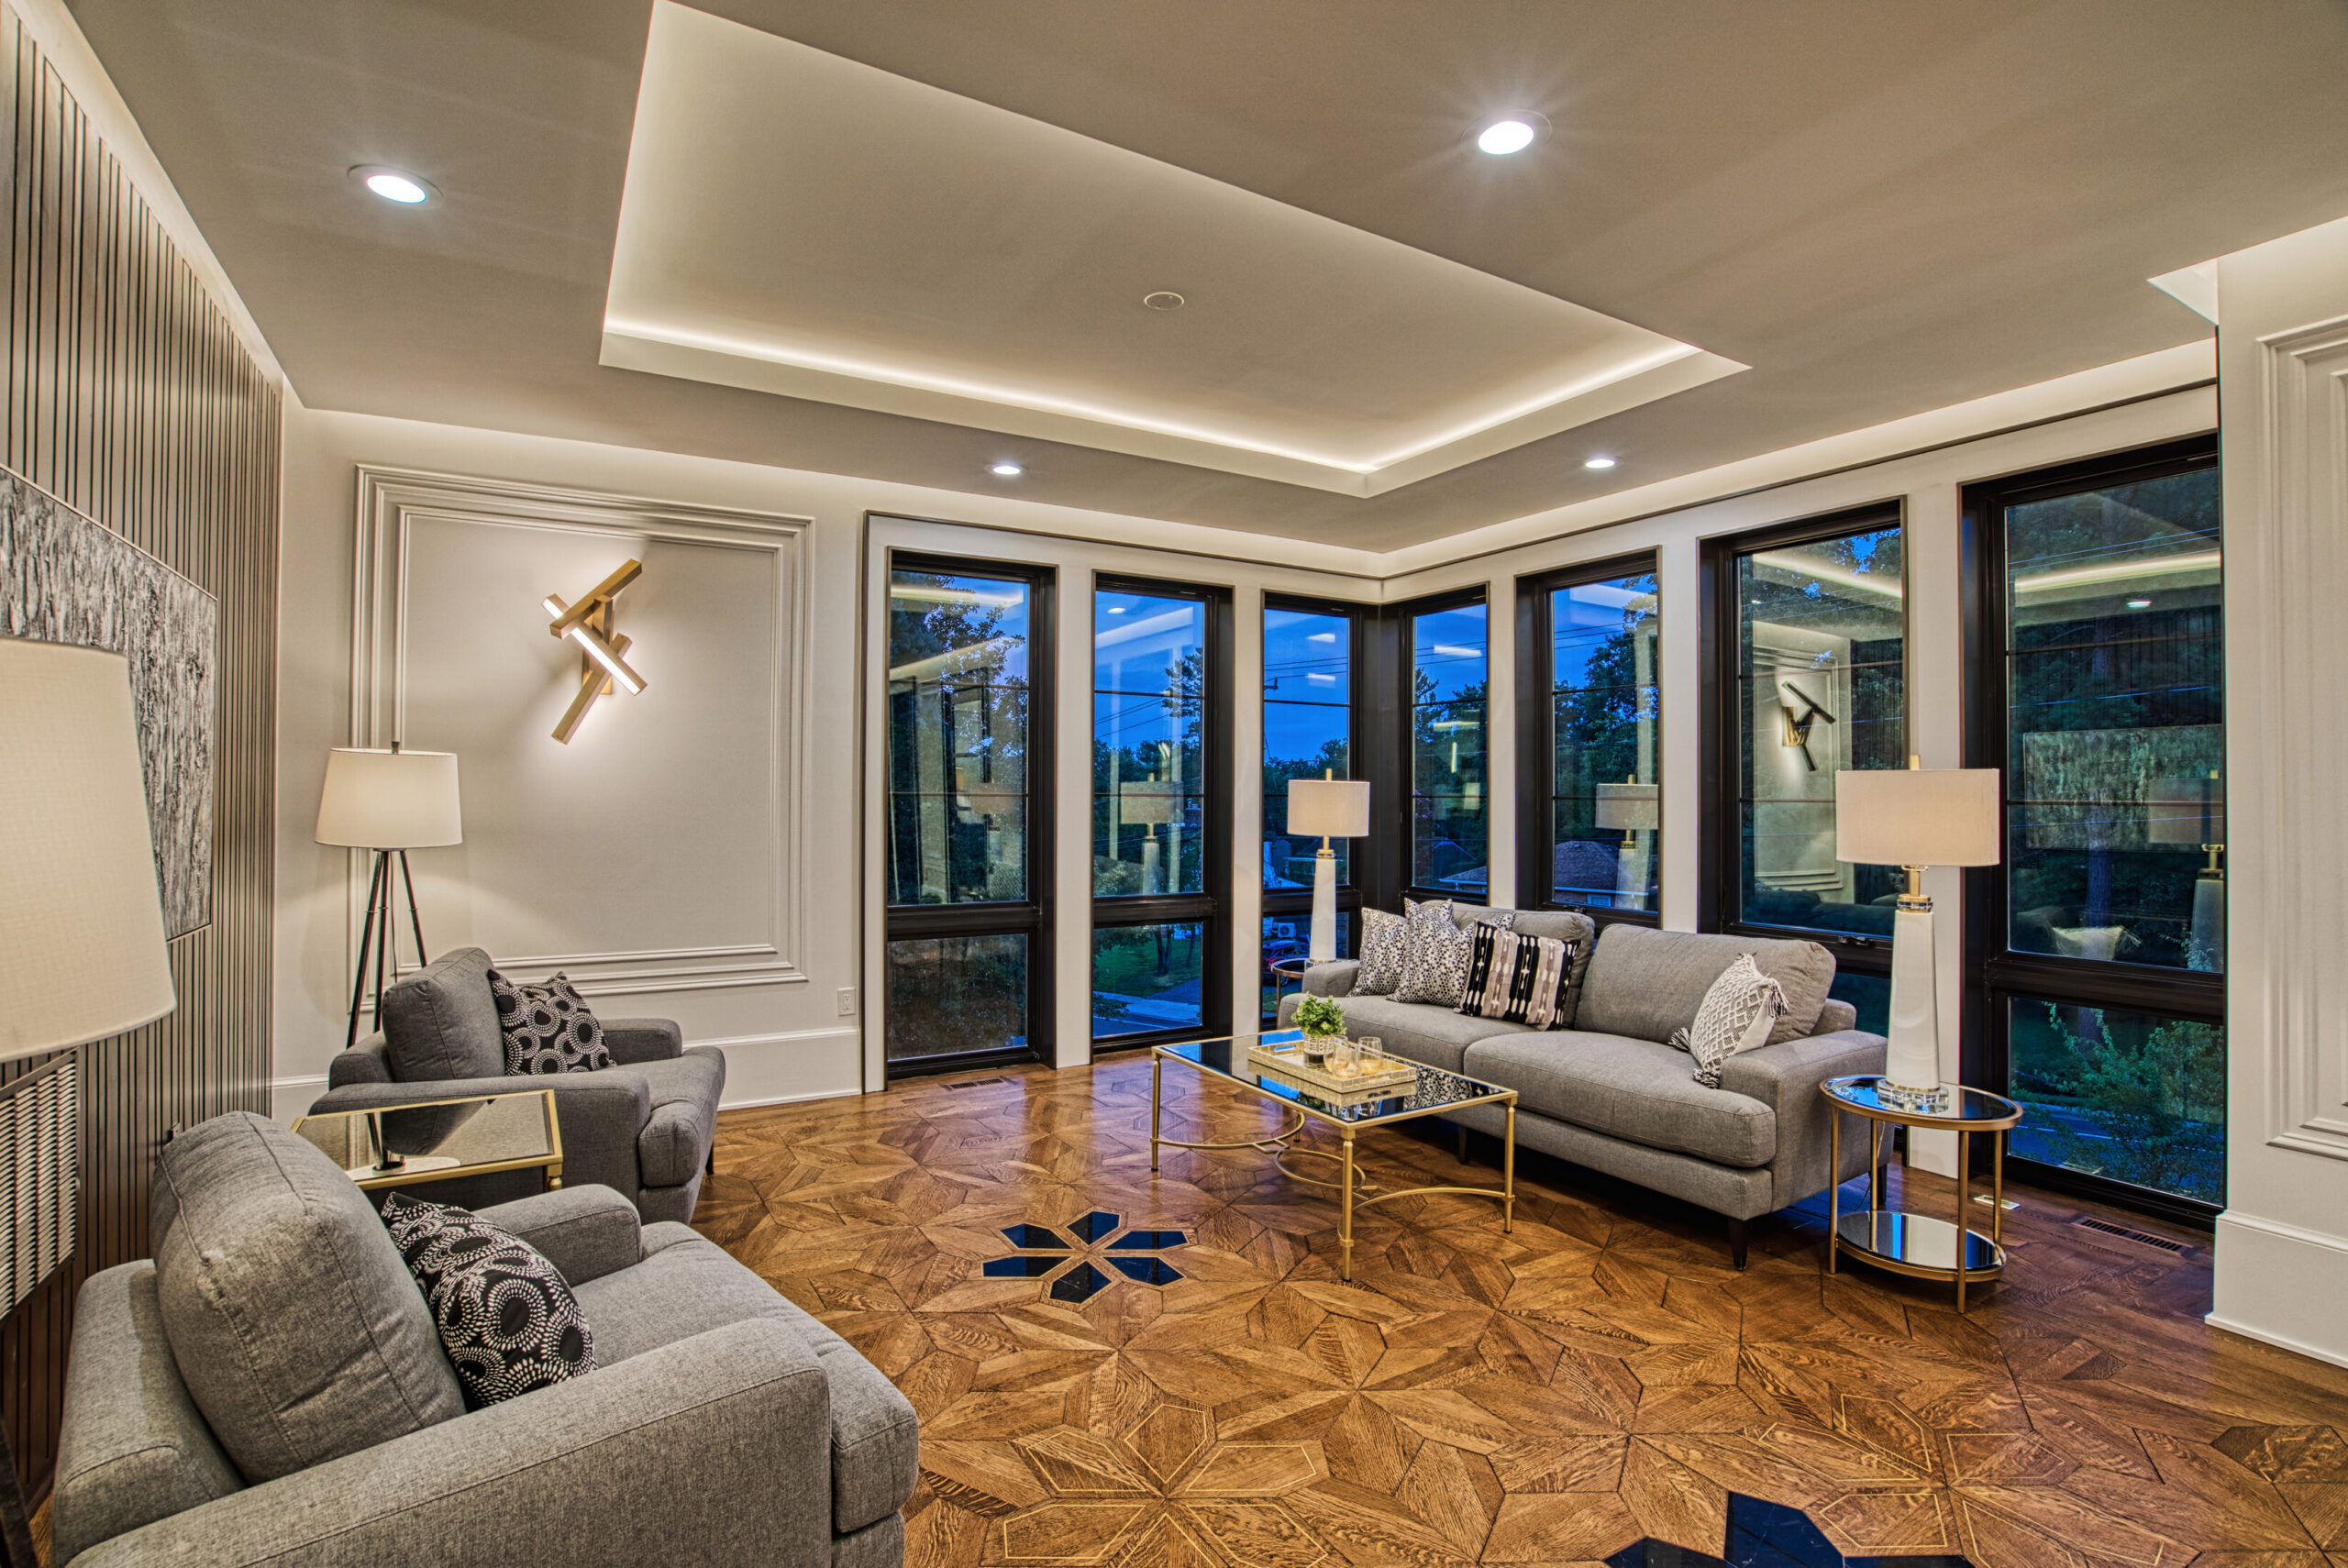 sitting area in luxury new construction home with floor to ceiling windows on two sides, tray ceiling, custom hardwood floors and modern furniture